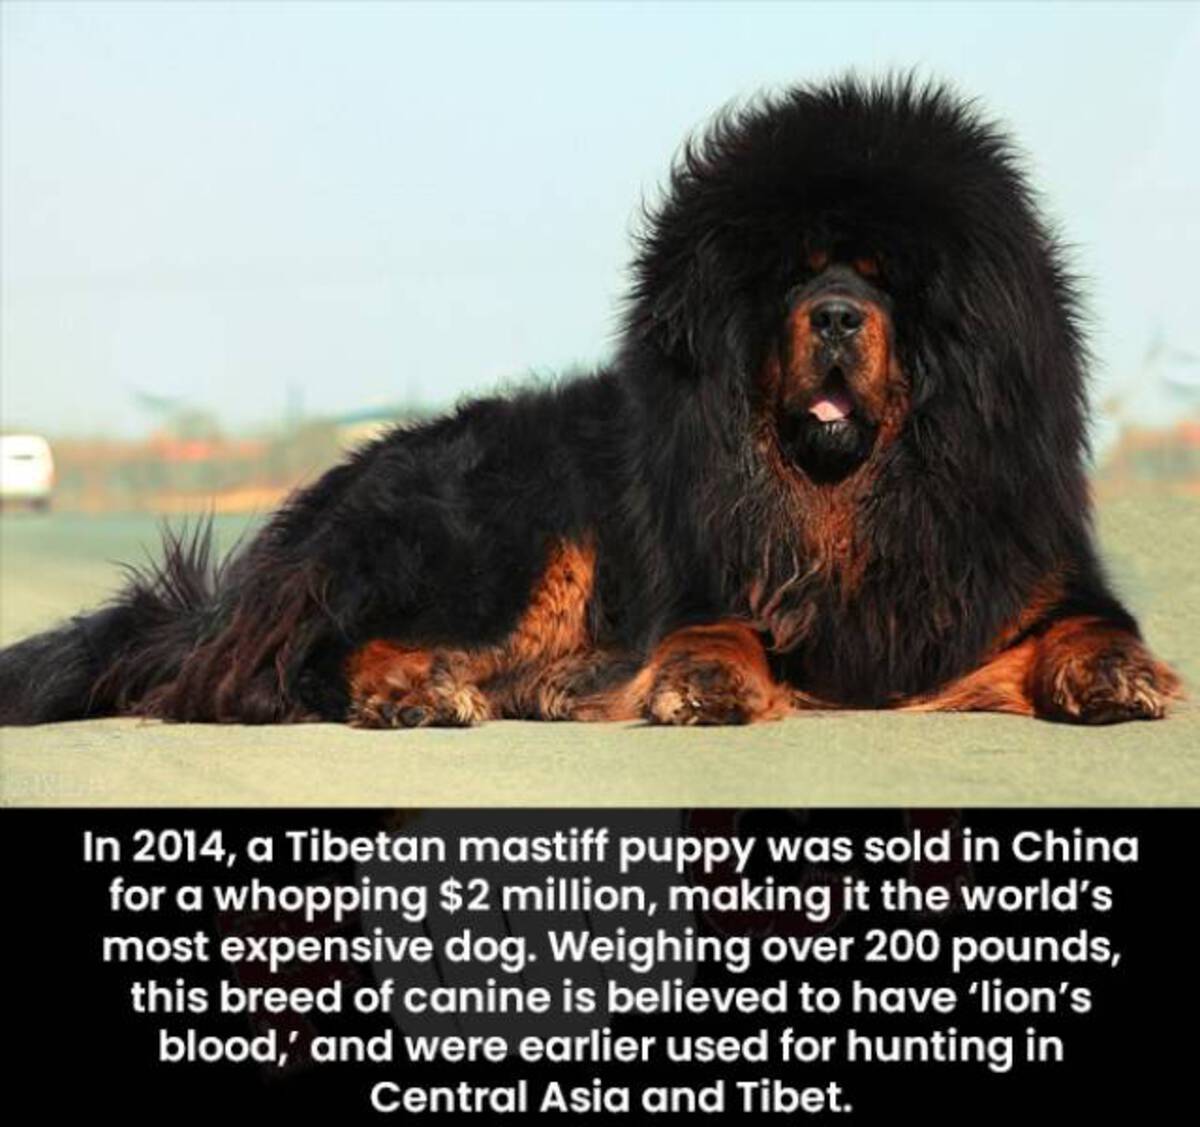 dog - In 2014, a Tibetan mastiff puppy was sold in China for a whopping $2 million, making it the world's most expensive dog. Weighing over 200 pounds, this breed of canine is believed to have 'lion's blood,' and were earlier used for hunting in Central A